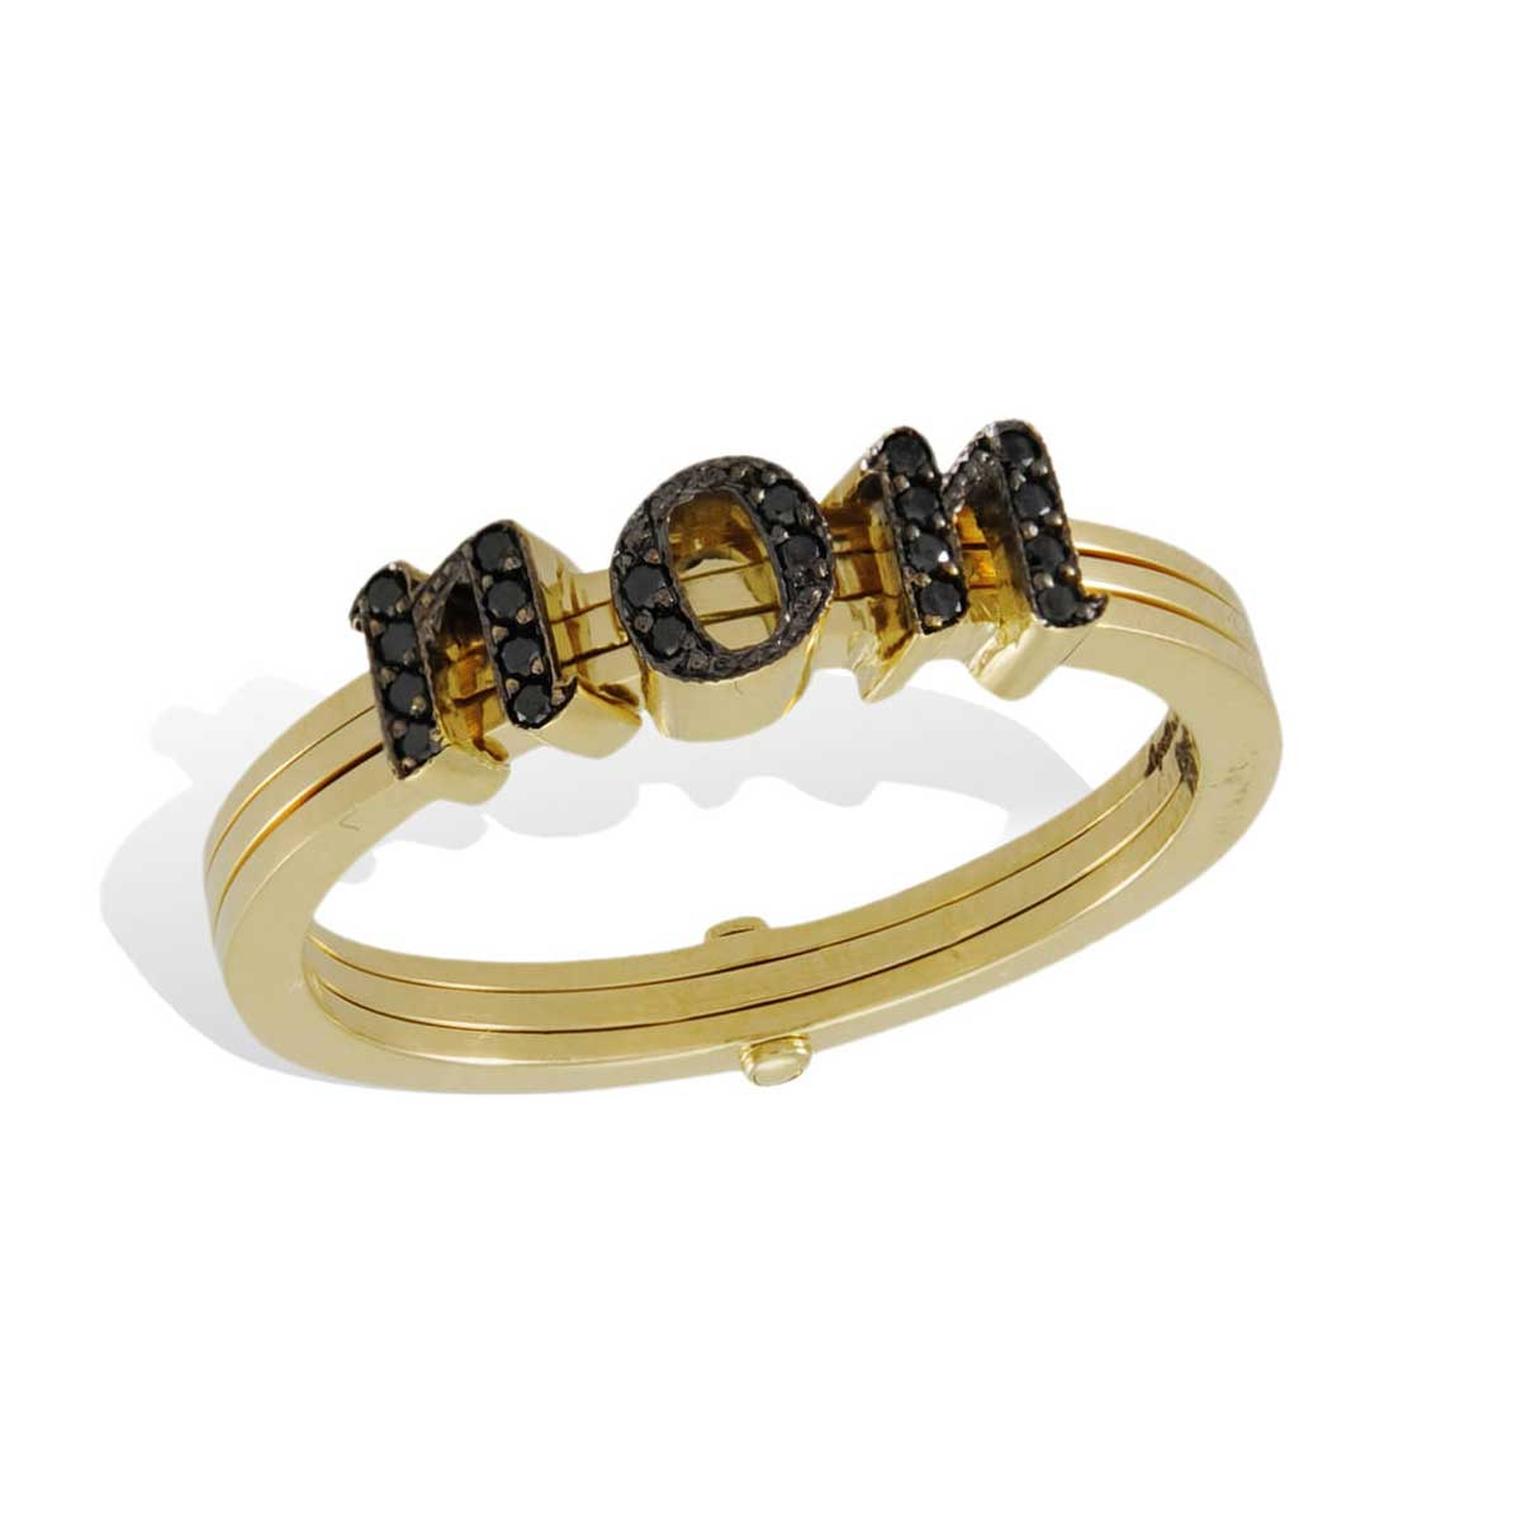 Lydia Courteille gold and black diamond Non ring